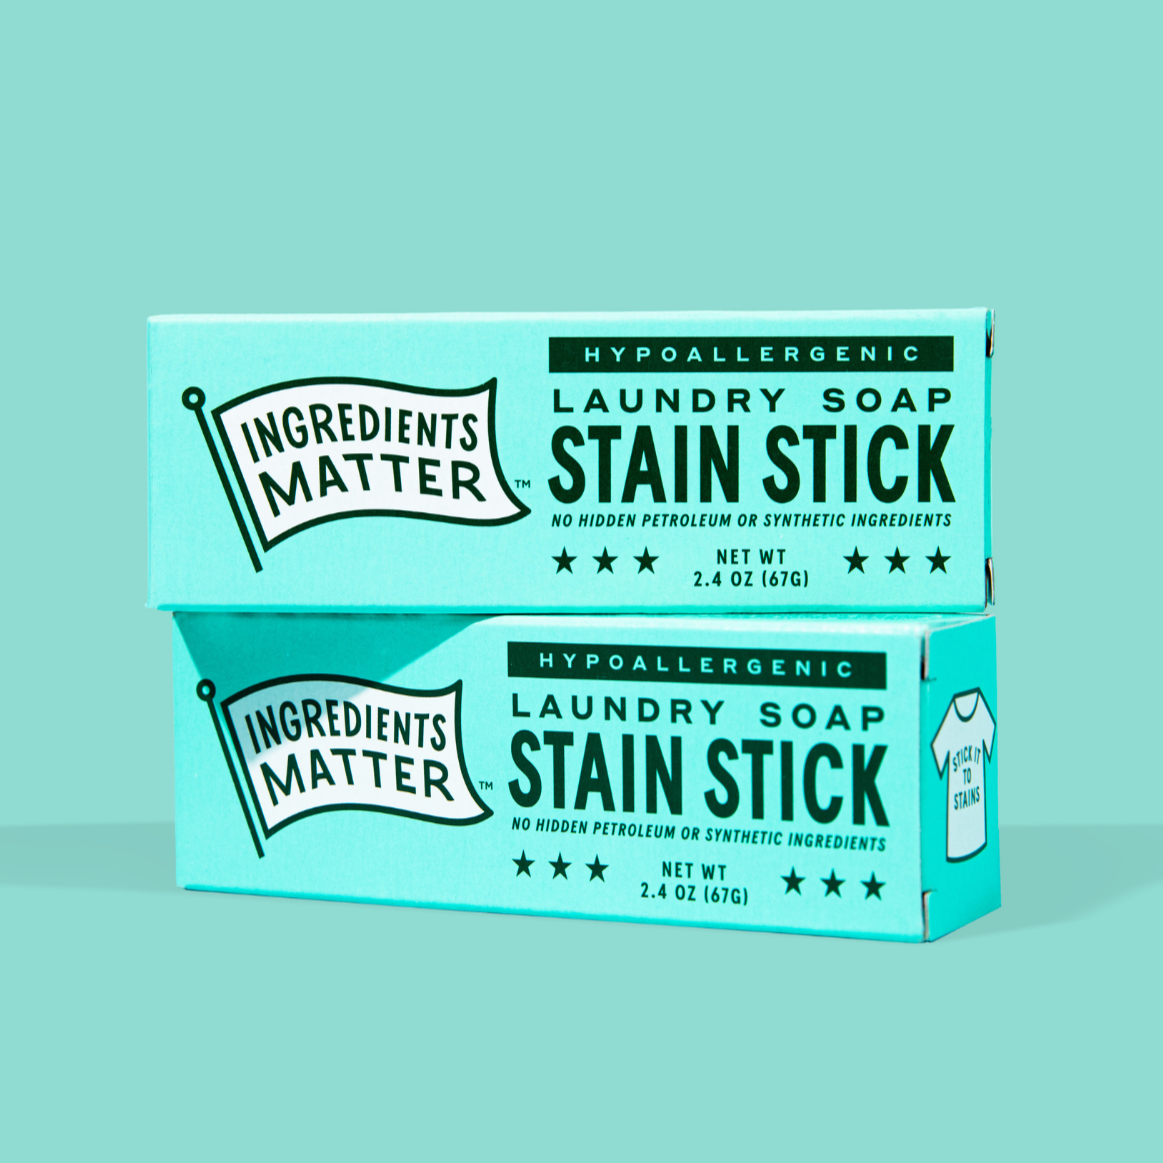 Ingredients Matter Laundry Soap Stain Stick Hypoallergenic turquoise box with forest green lettering and ingredients matter logo